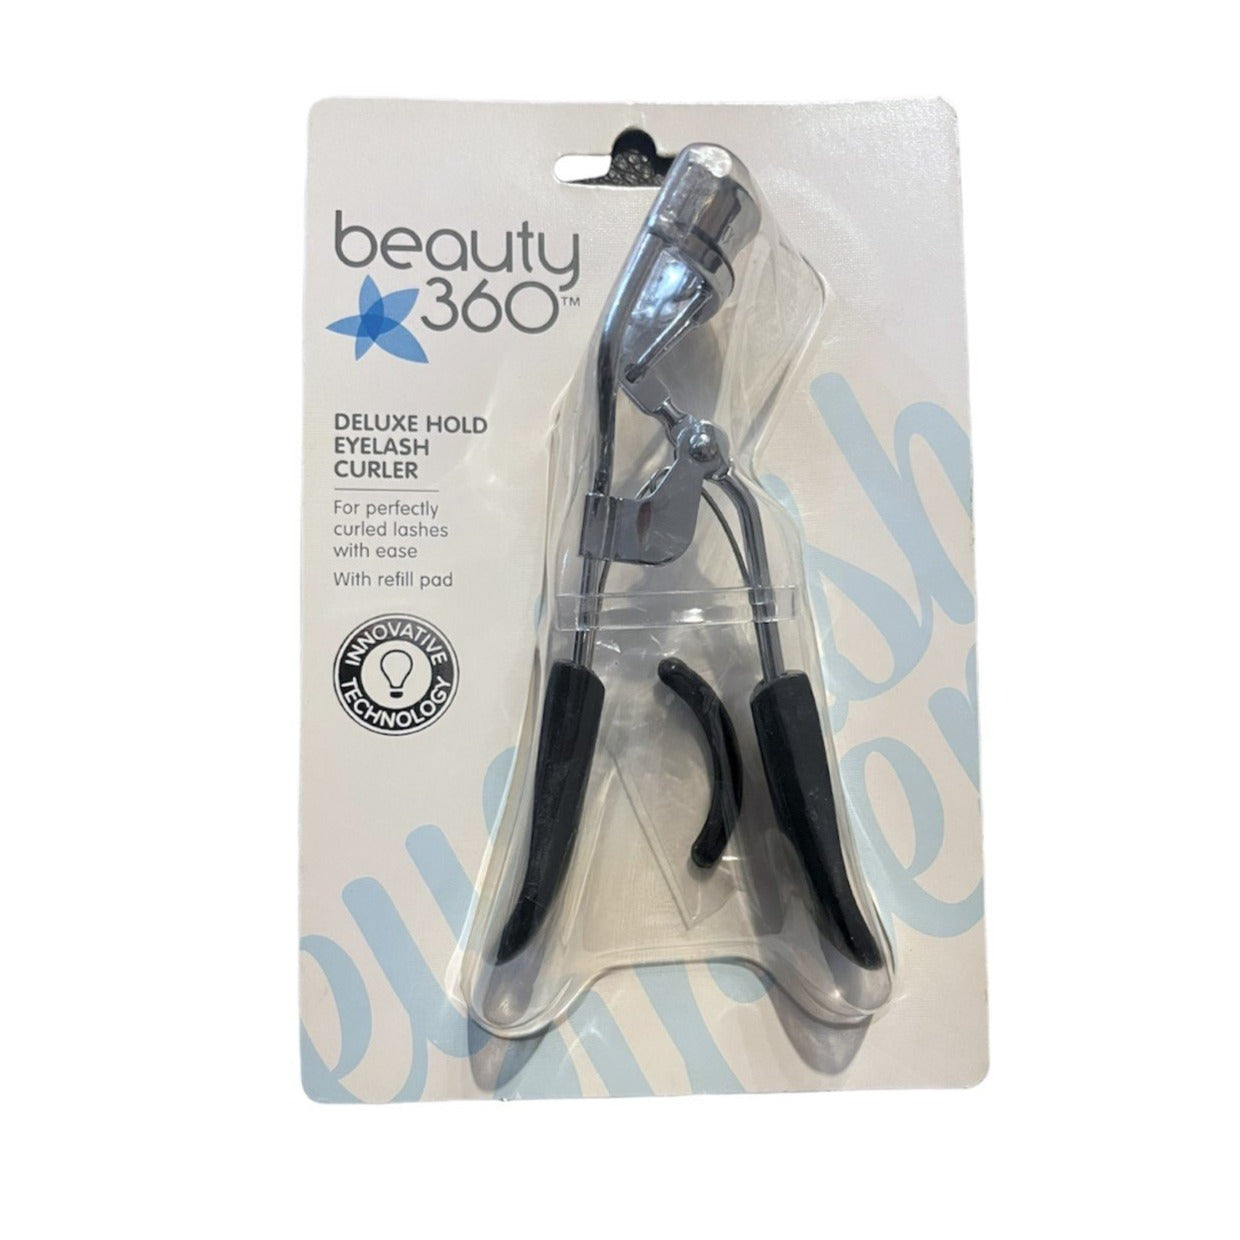 Beauty 360 Deluxe Hold Eyelash Curlier Liquidations, wholesale, bargain, deal of the day, black friday, stocking filler